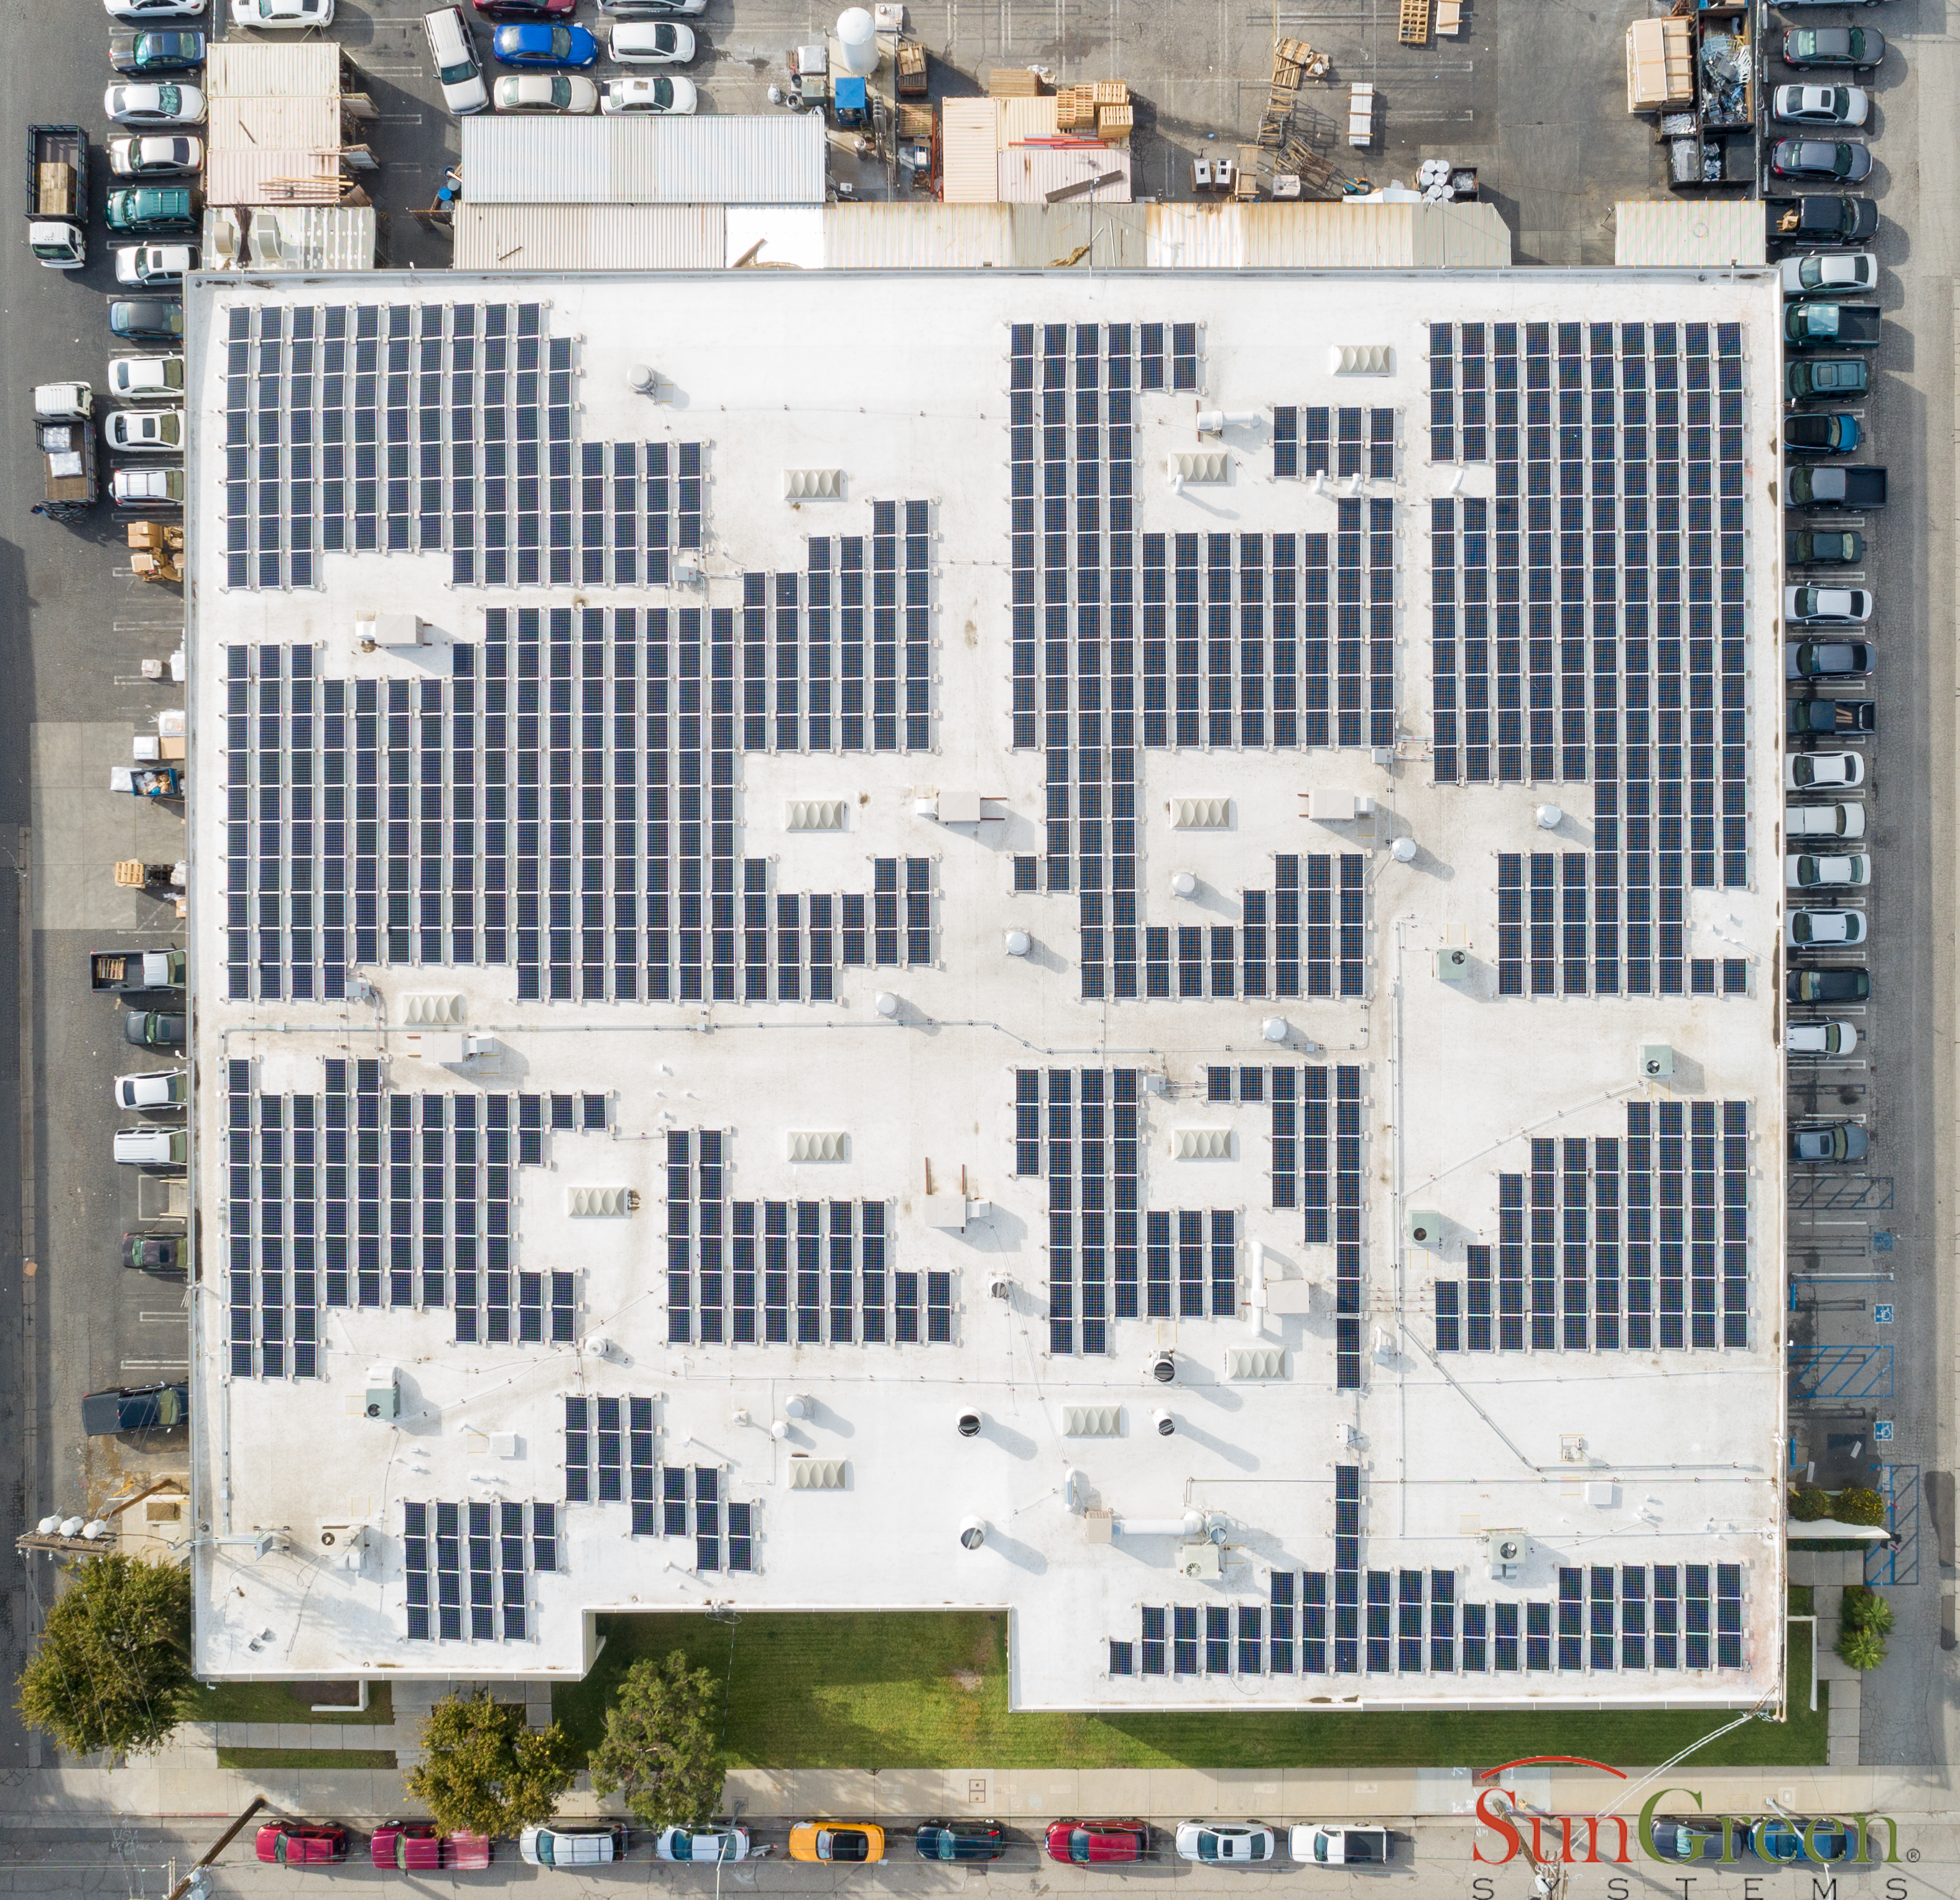 LADWP Feed-in Tariff with Ballasted Solar Panels